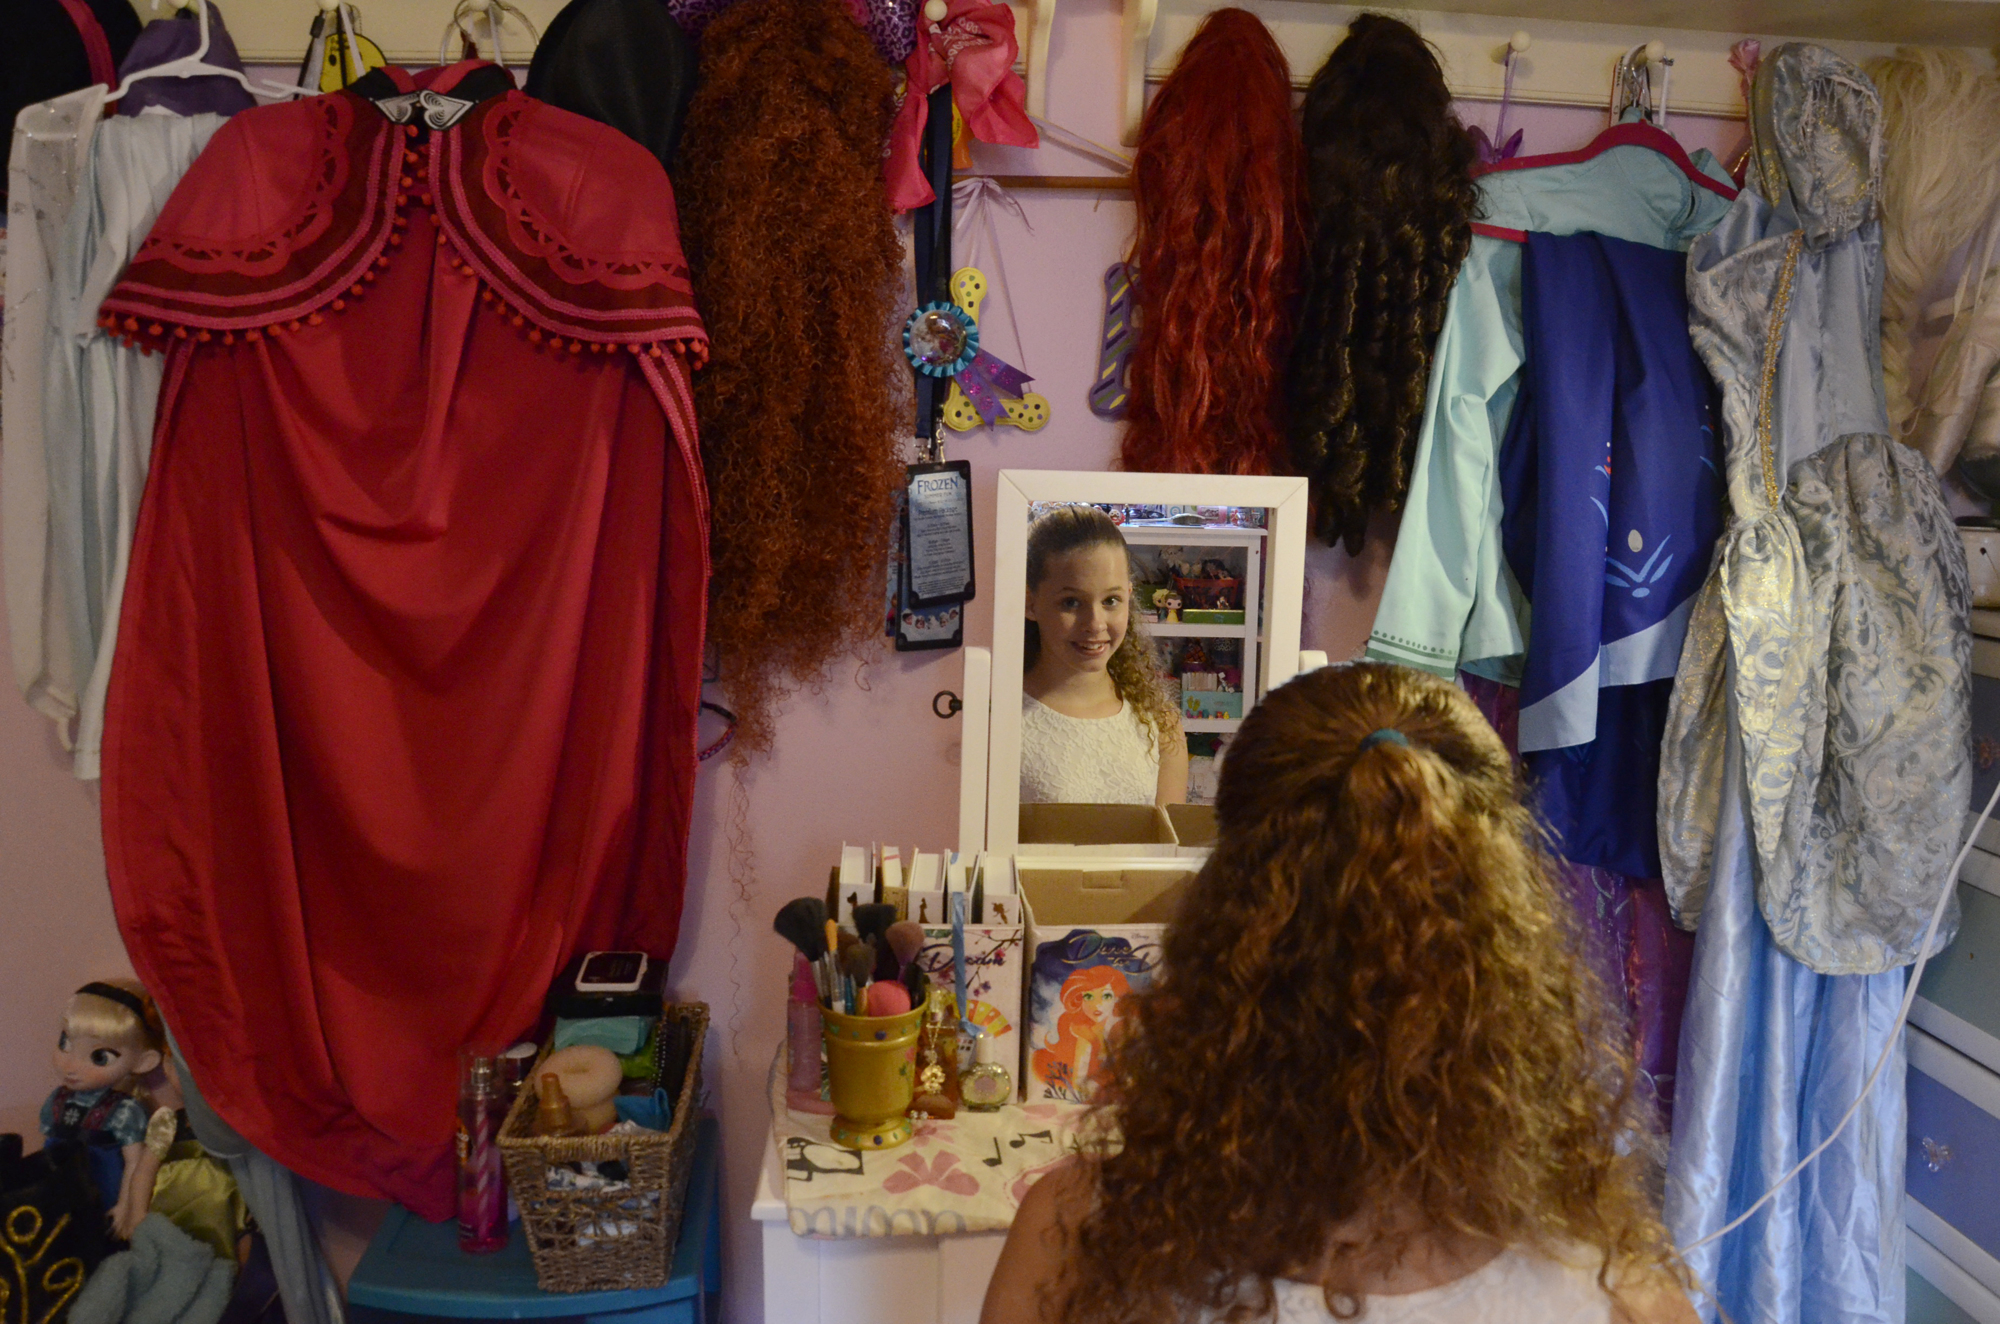 Belle puts on her costume and make-up before she leaves for events, so that when she arrives, she is fully in-character.